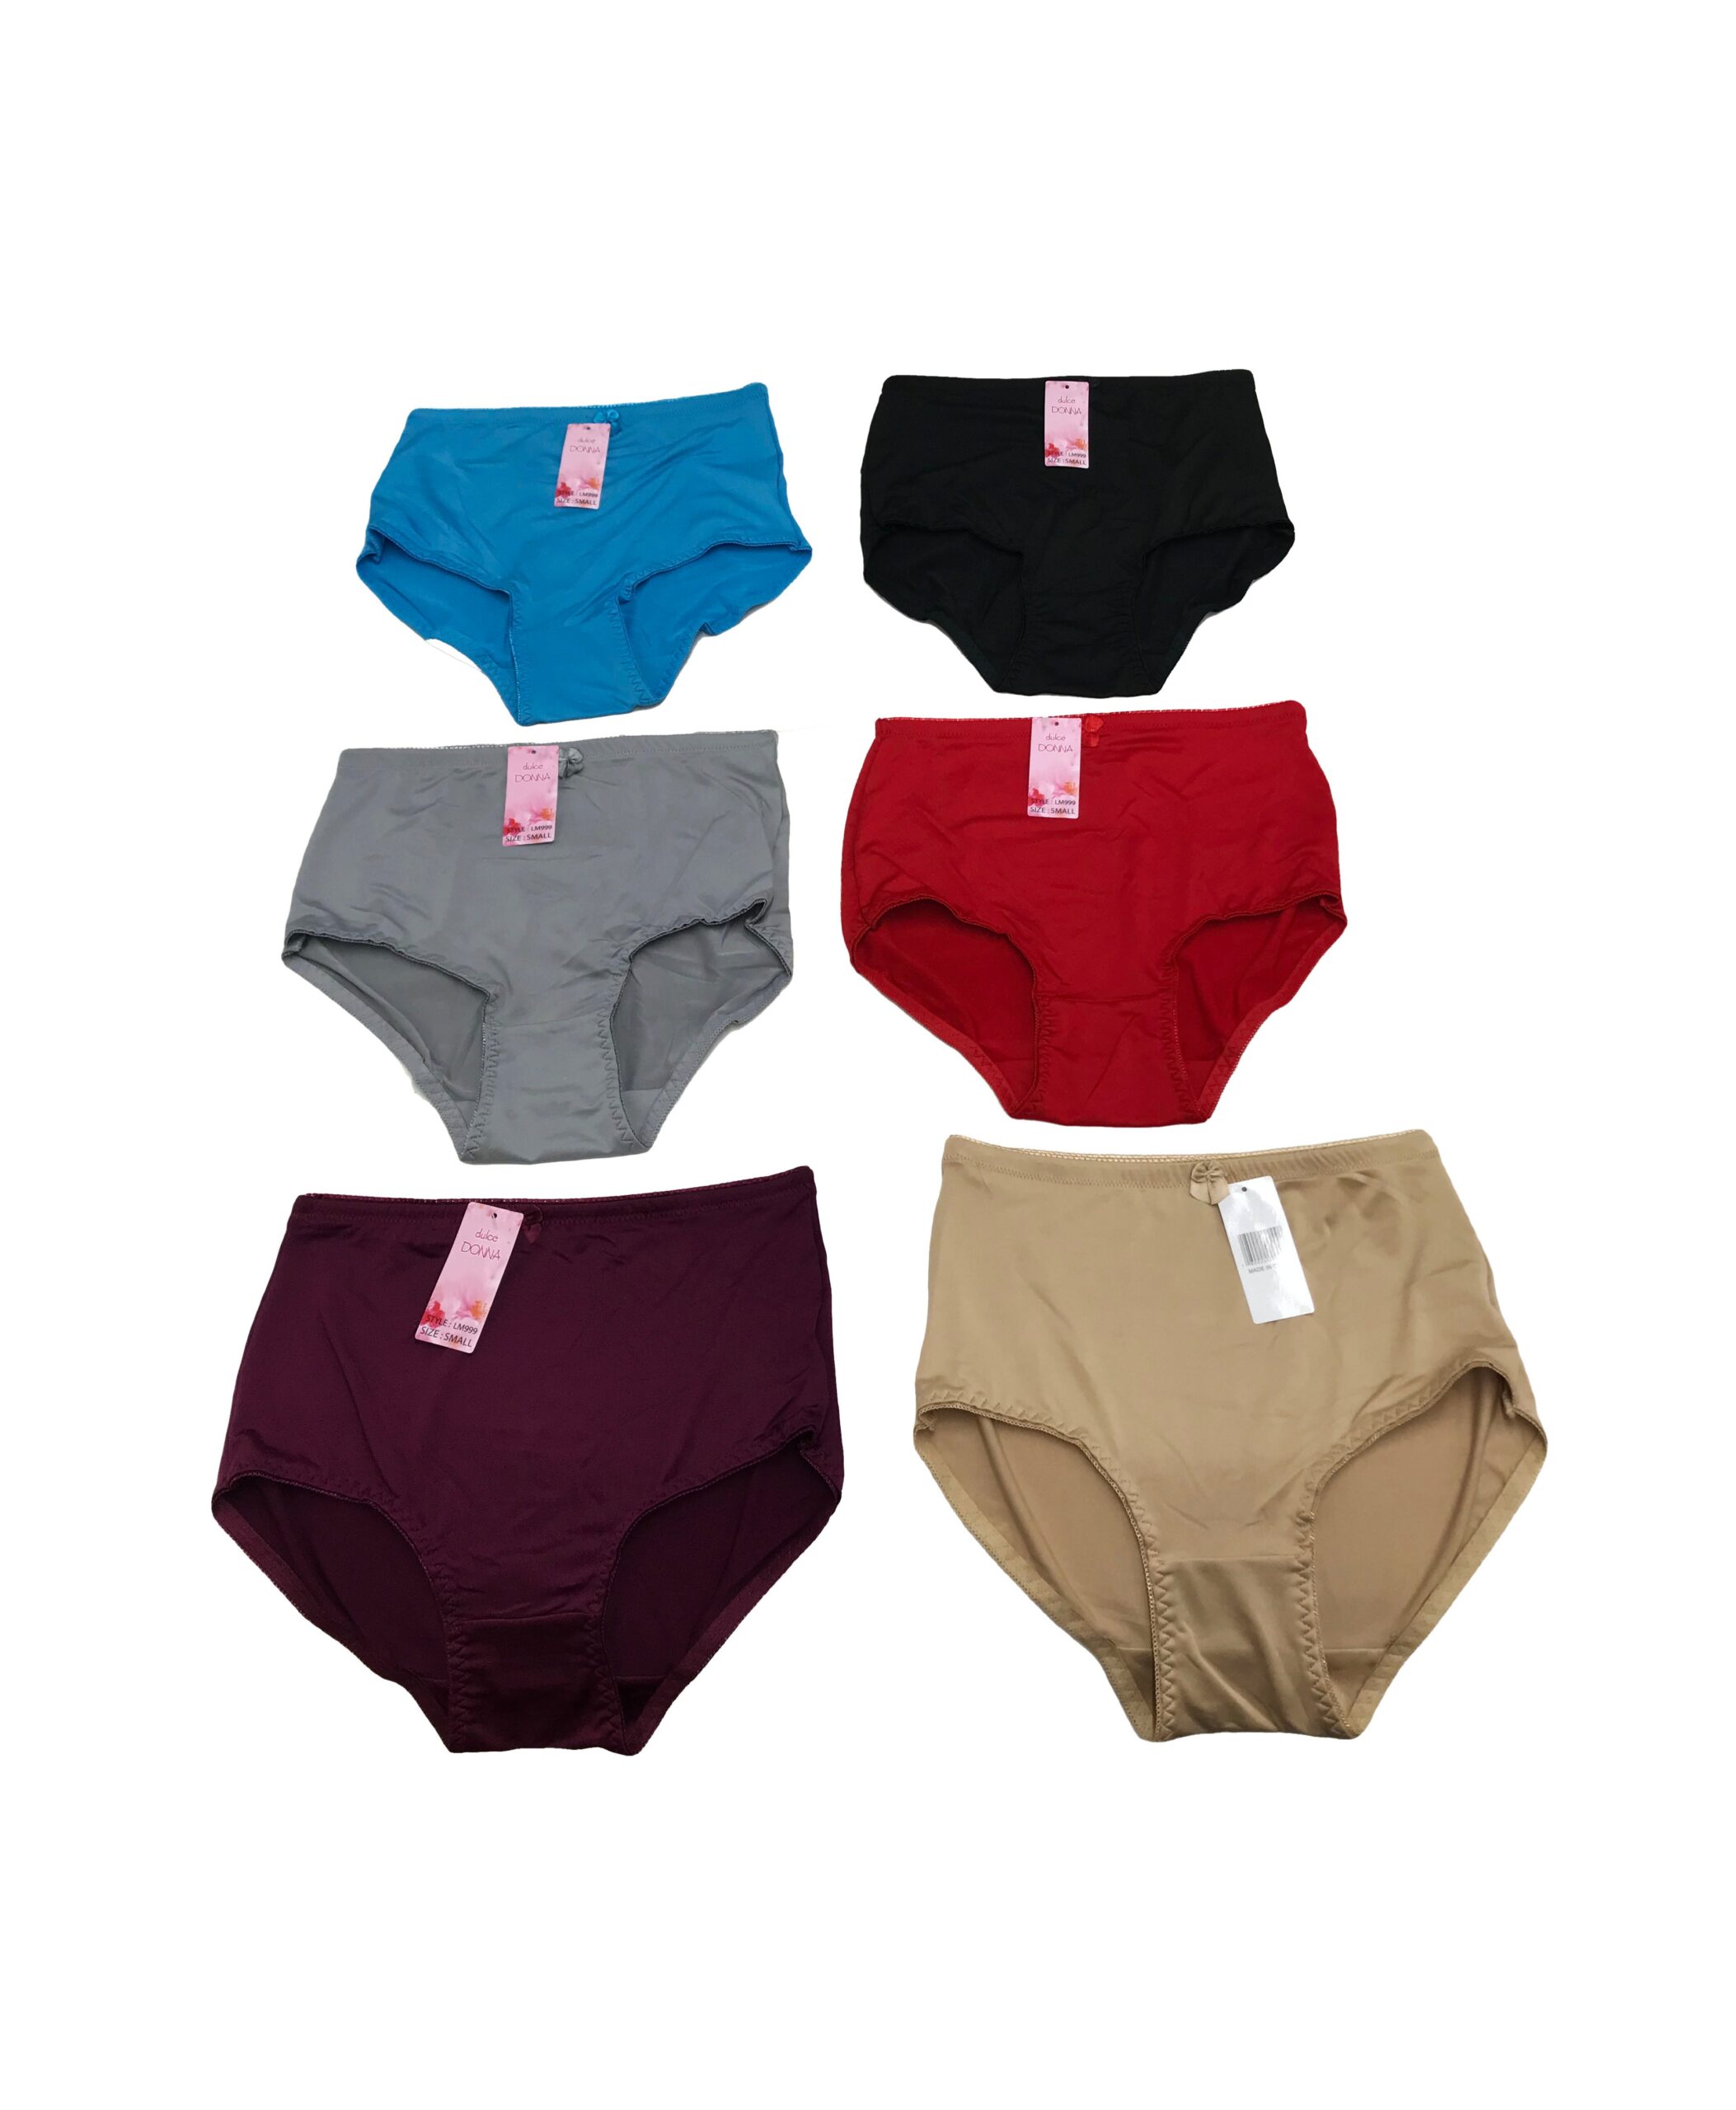 https://www.valsanincs.shop/wp-content/uploads/1704/76/only-3-19-usd-for-dulce-donna-panties-fajas-de-mujer-online-at-the-shop_0-scaled.jpg